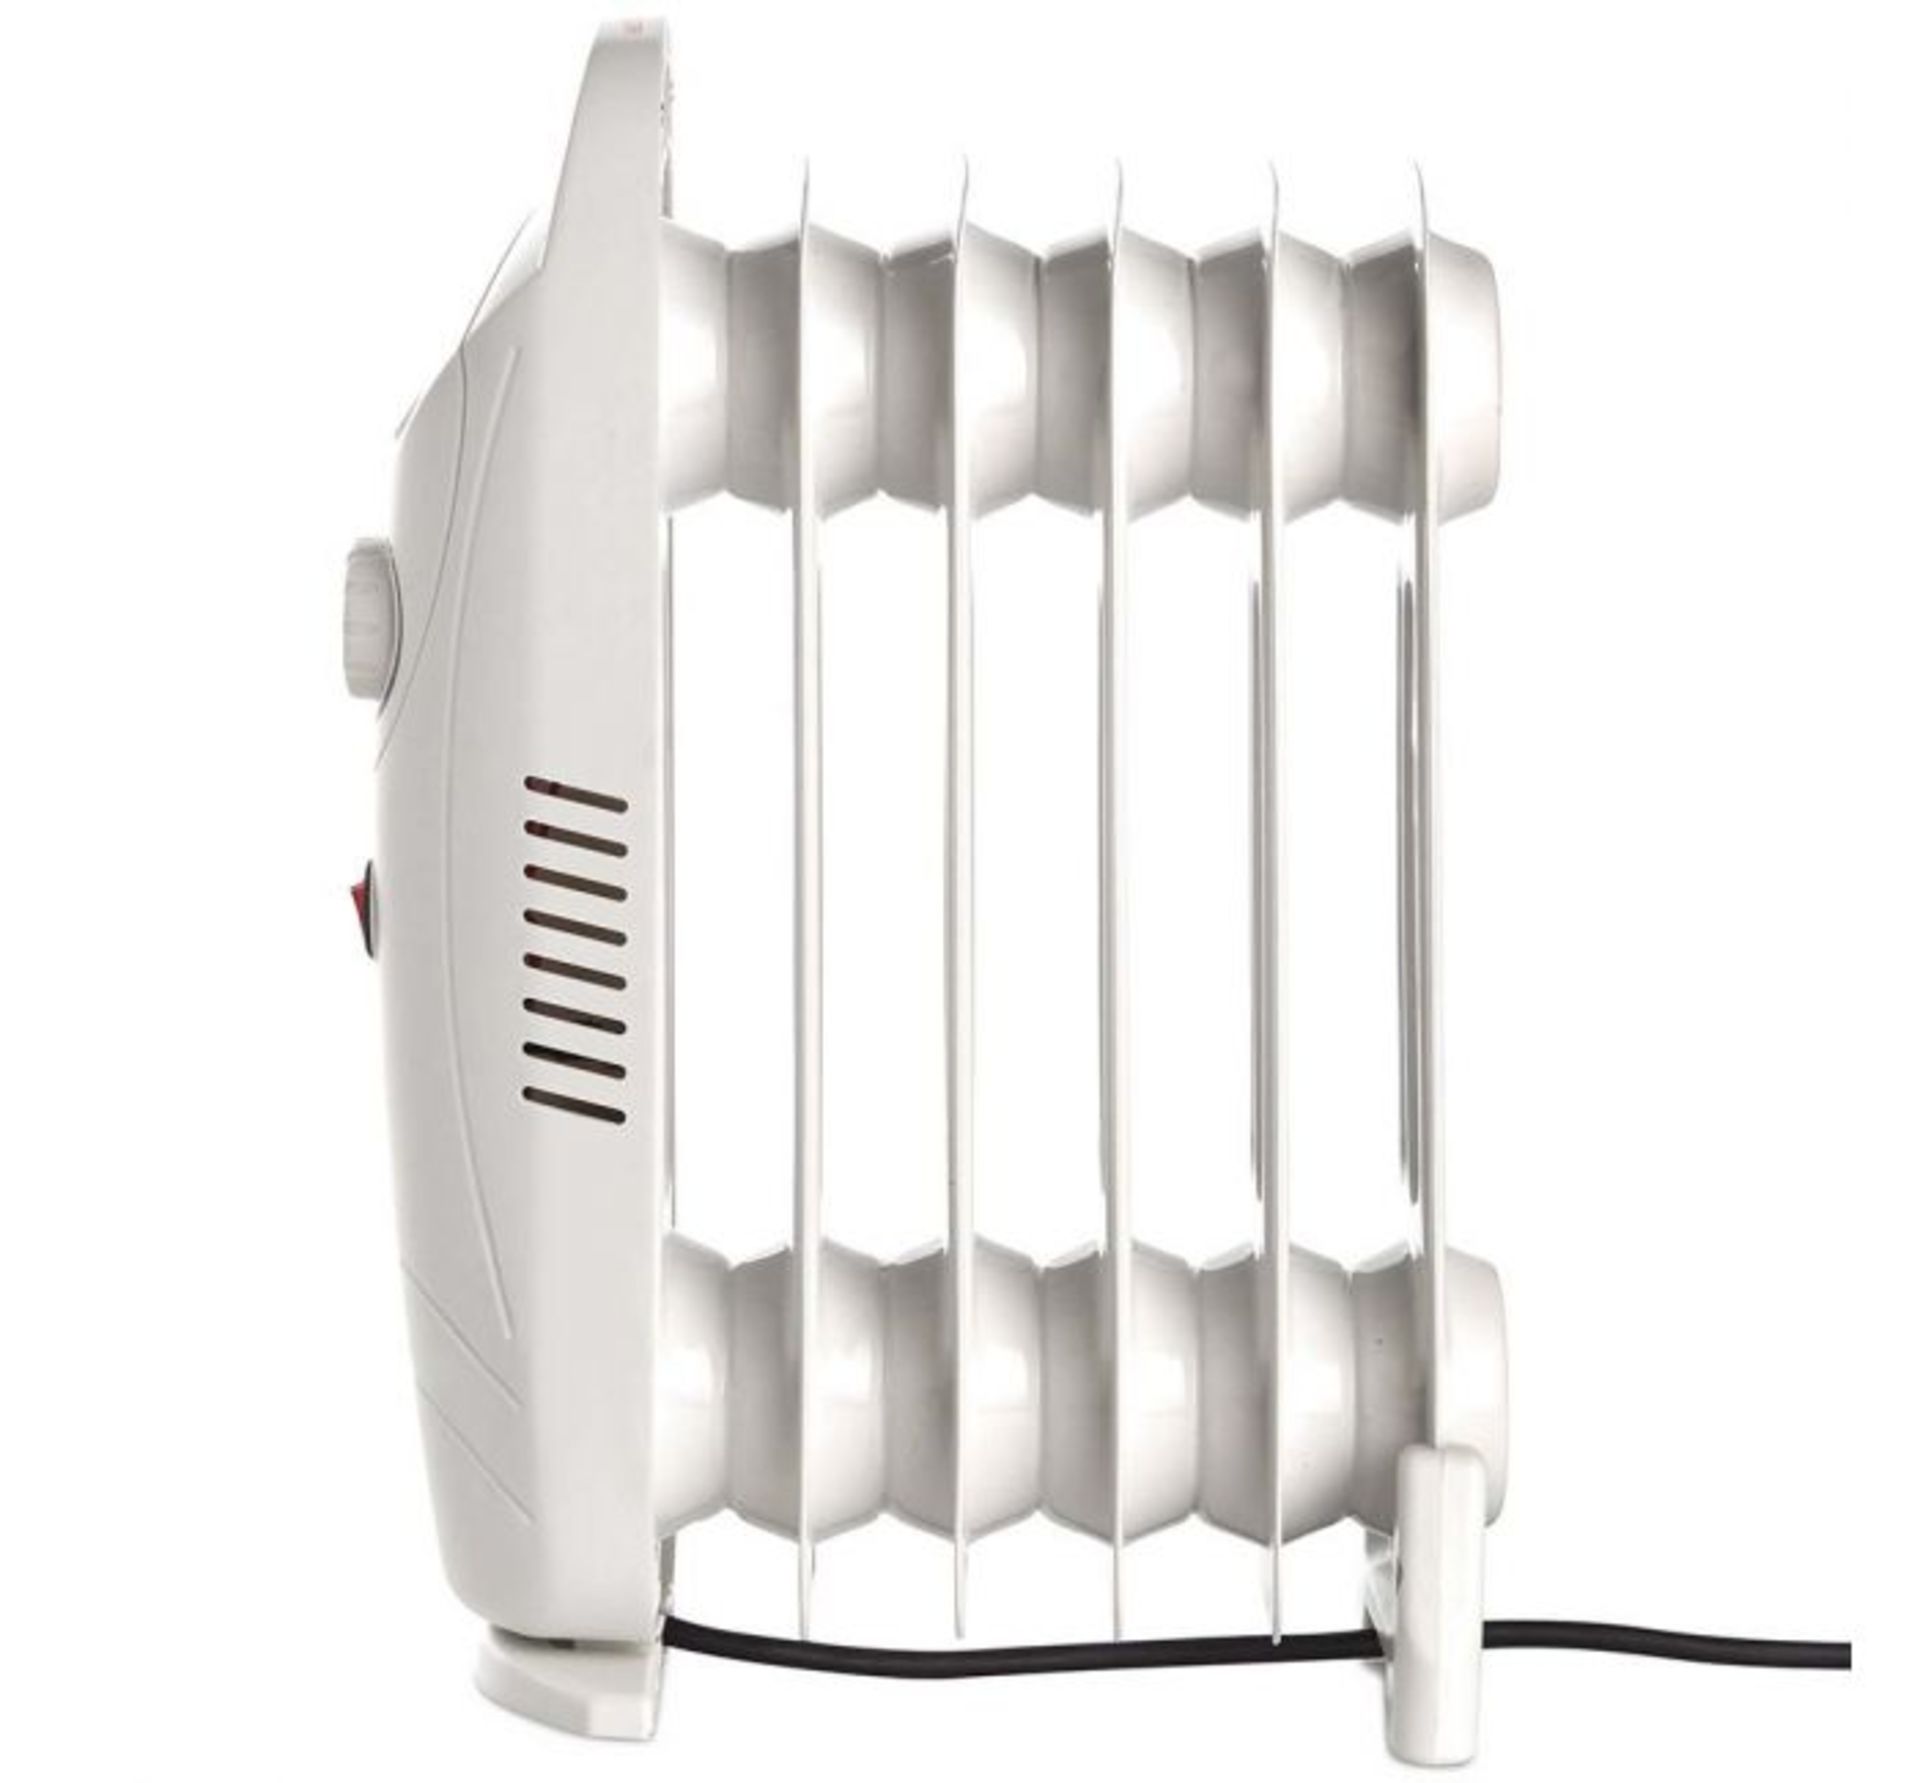 (X34) 1x 6 Fin 800W Oil Filled Radiator - White. Compact yet powerful 800W radiator with 6 oil-fil - Image 2 of 4